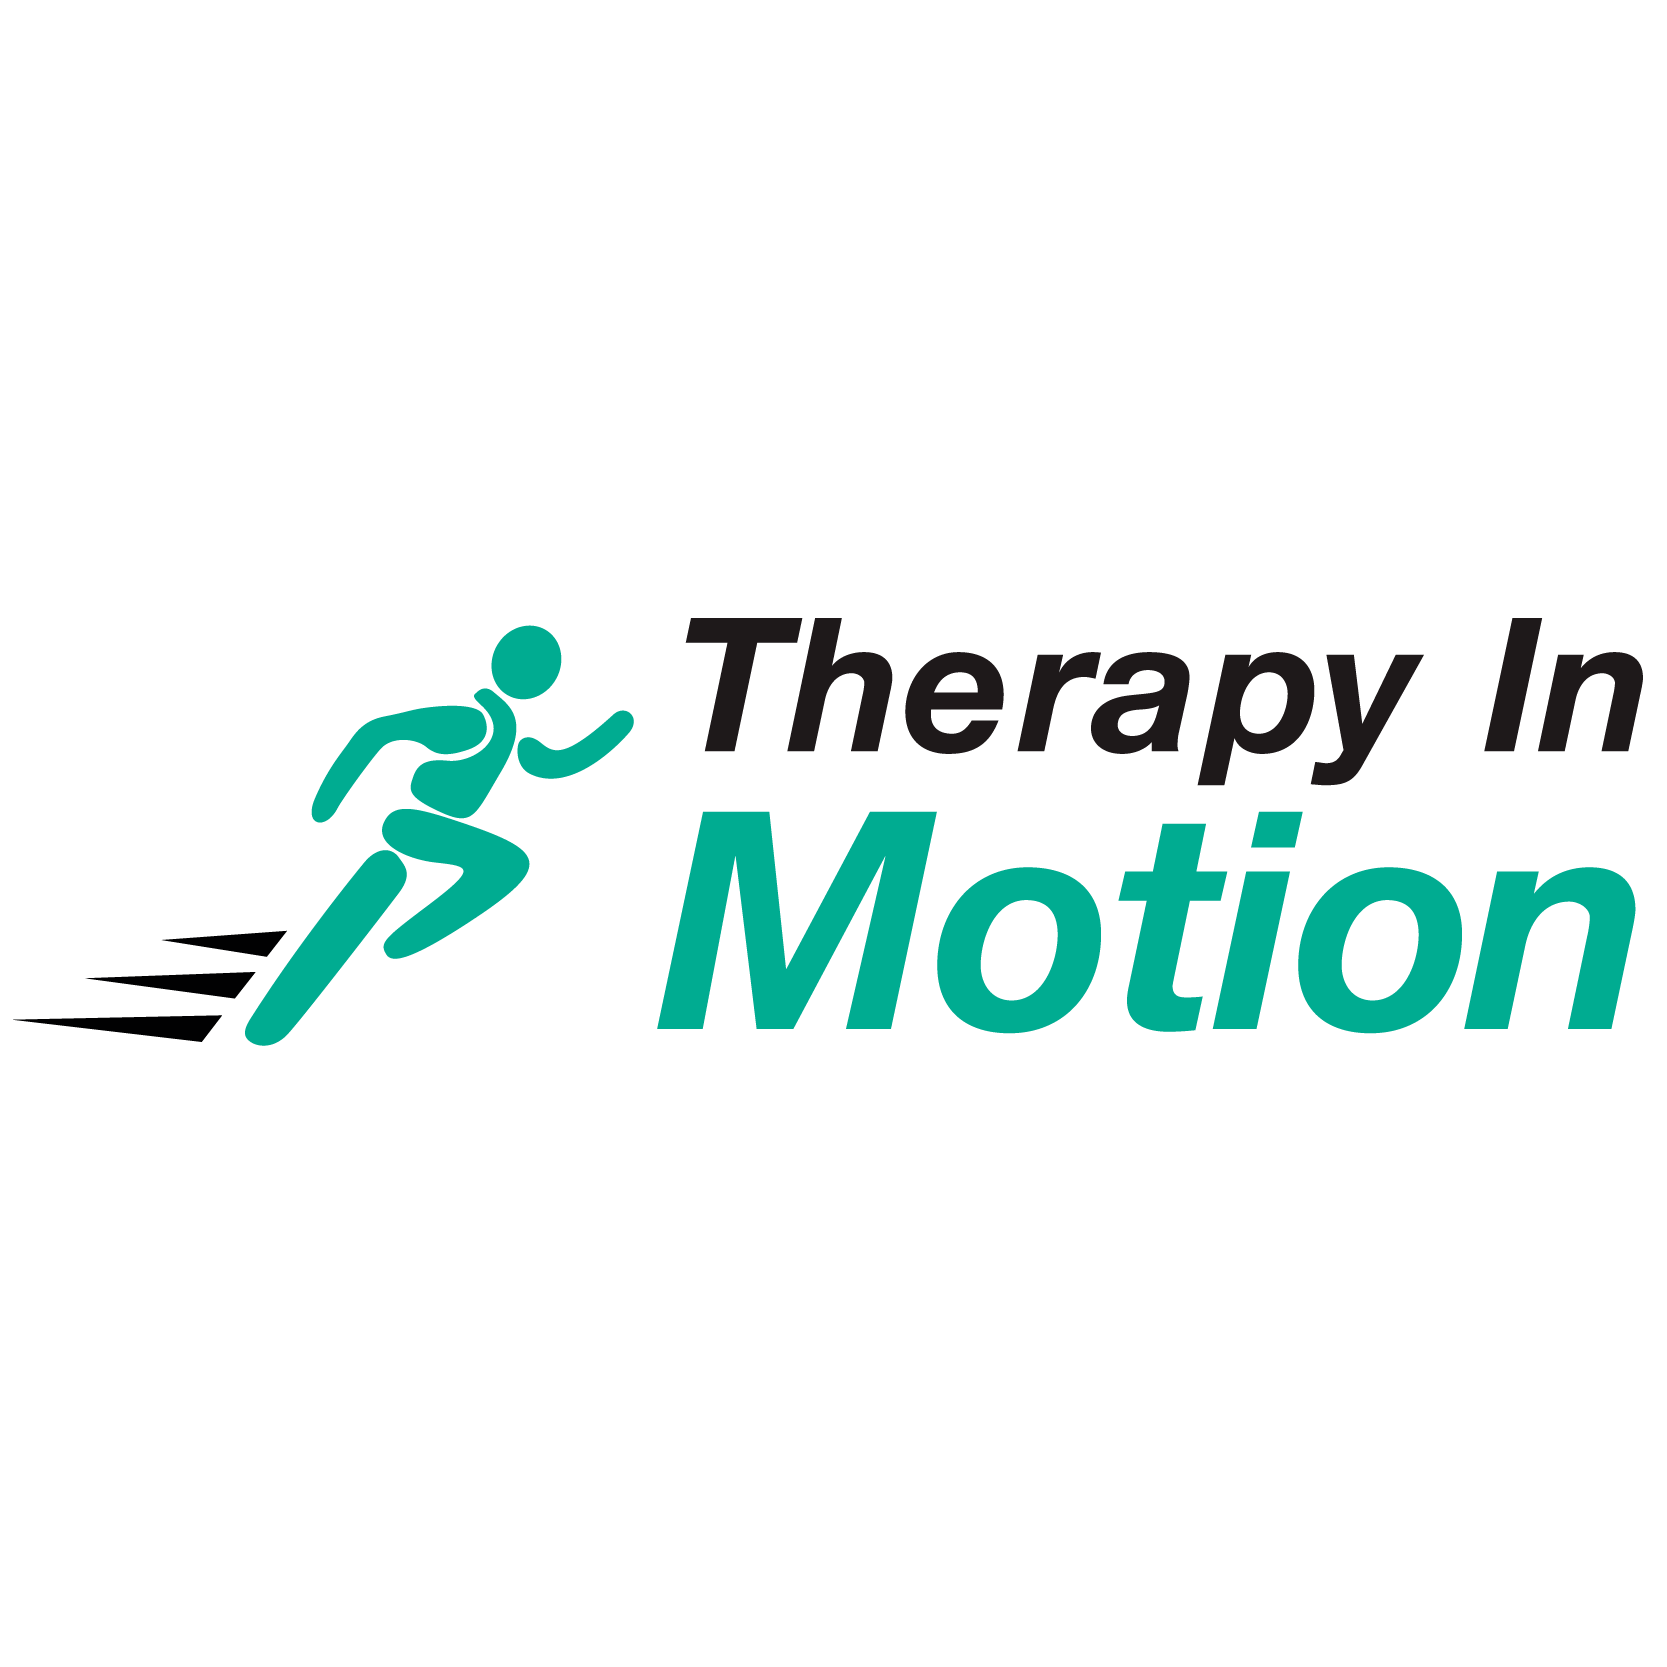 Therapy in Motion Physical Therapy - Oklahoma City, OK 73132 - (405)817-8002 | ShowMeLocal.com